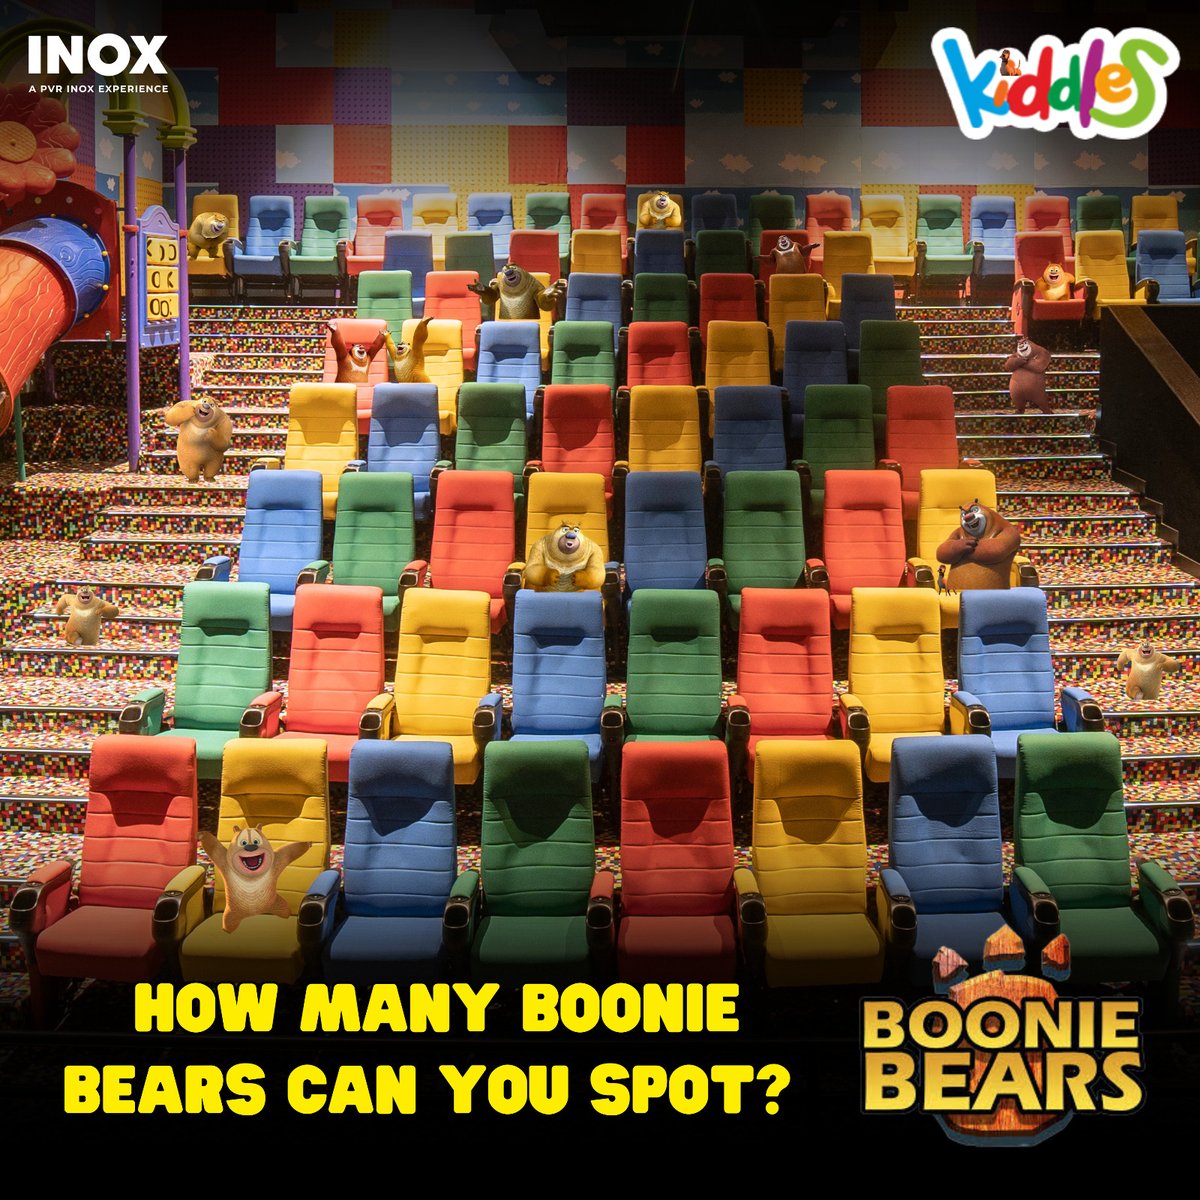 Could you identify the numbers of Bonnie Bears present at the movie theater? Comment below. . This Mother's Day, treat your children to Kiddles exclusively at #INOX. . #AnimatedMovies #ChildrensFilm #Chinese #Cinema #Enjoyment #BonnieBearsGuardianCode #Kiddles #BingjunZhang…